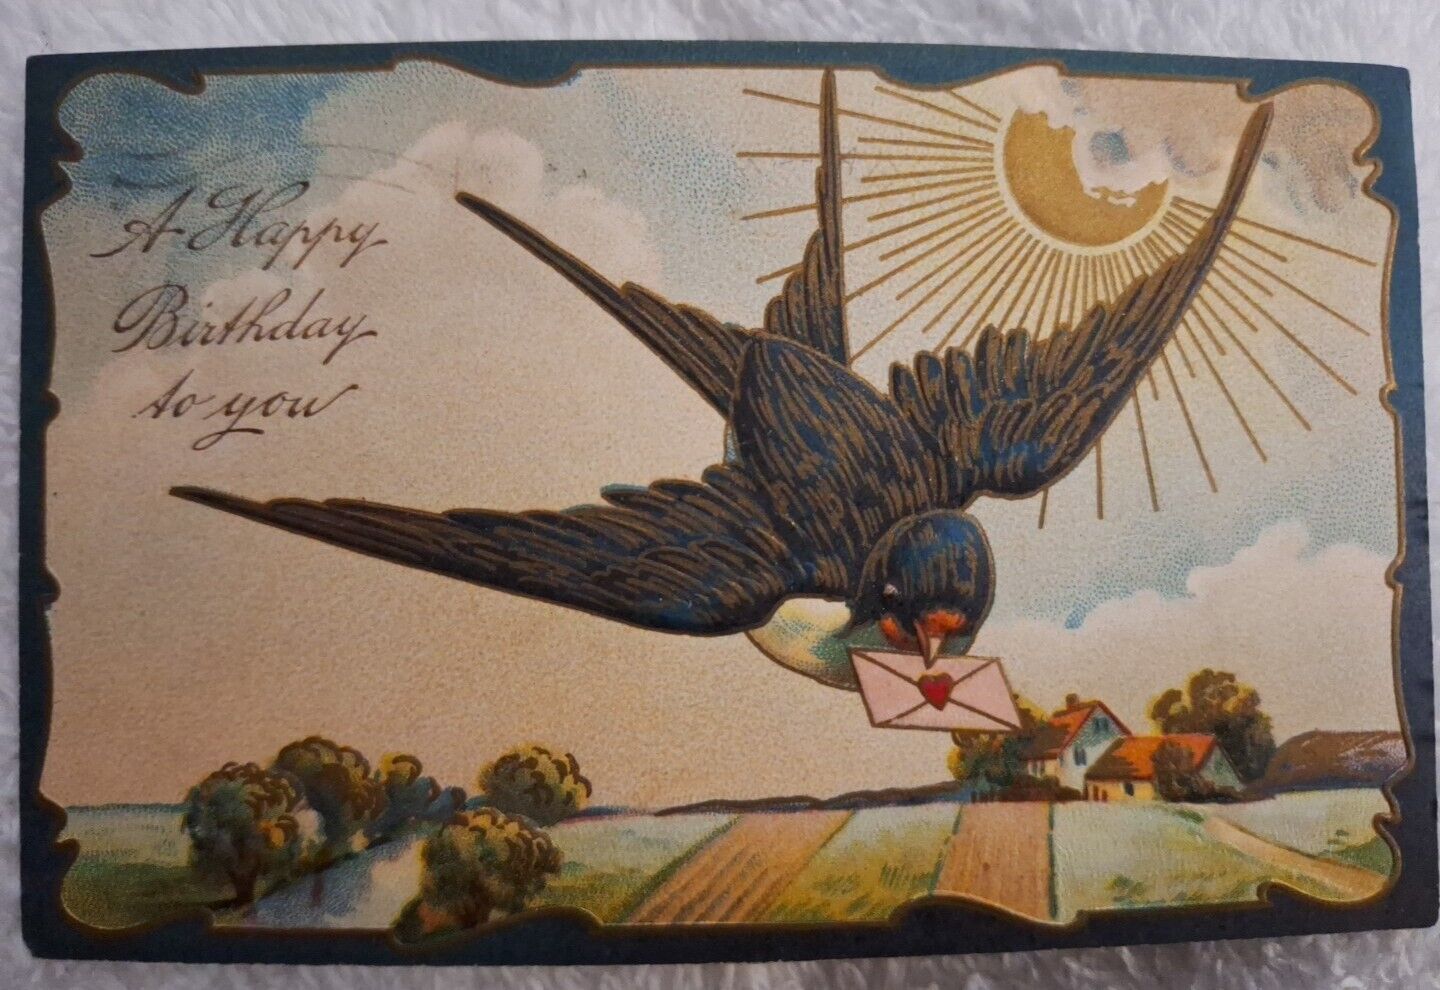 MESSAGE OF LOVE BIRTHDAY POST CARD 1910 GERMANY THIS CARD IS BEAUTIFUL 